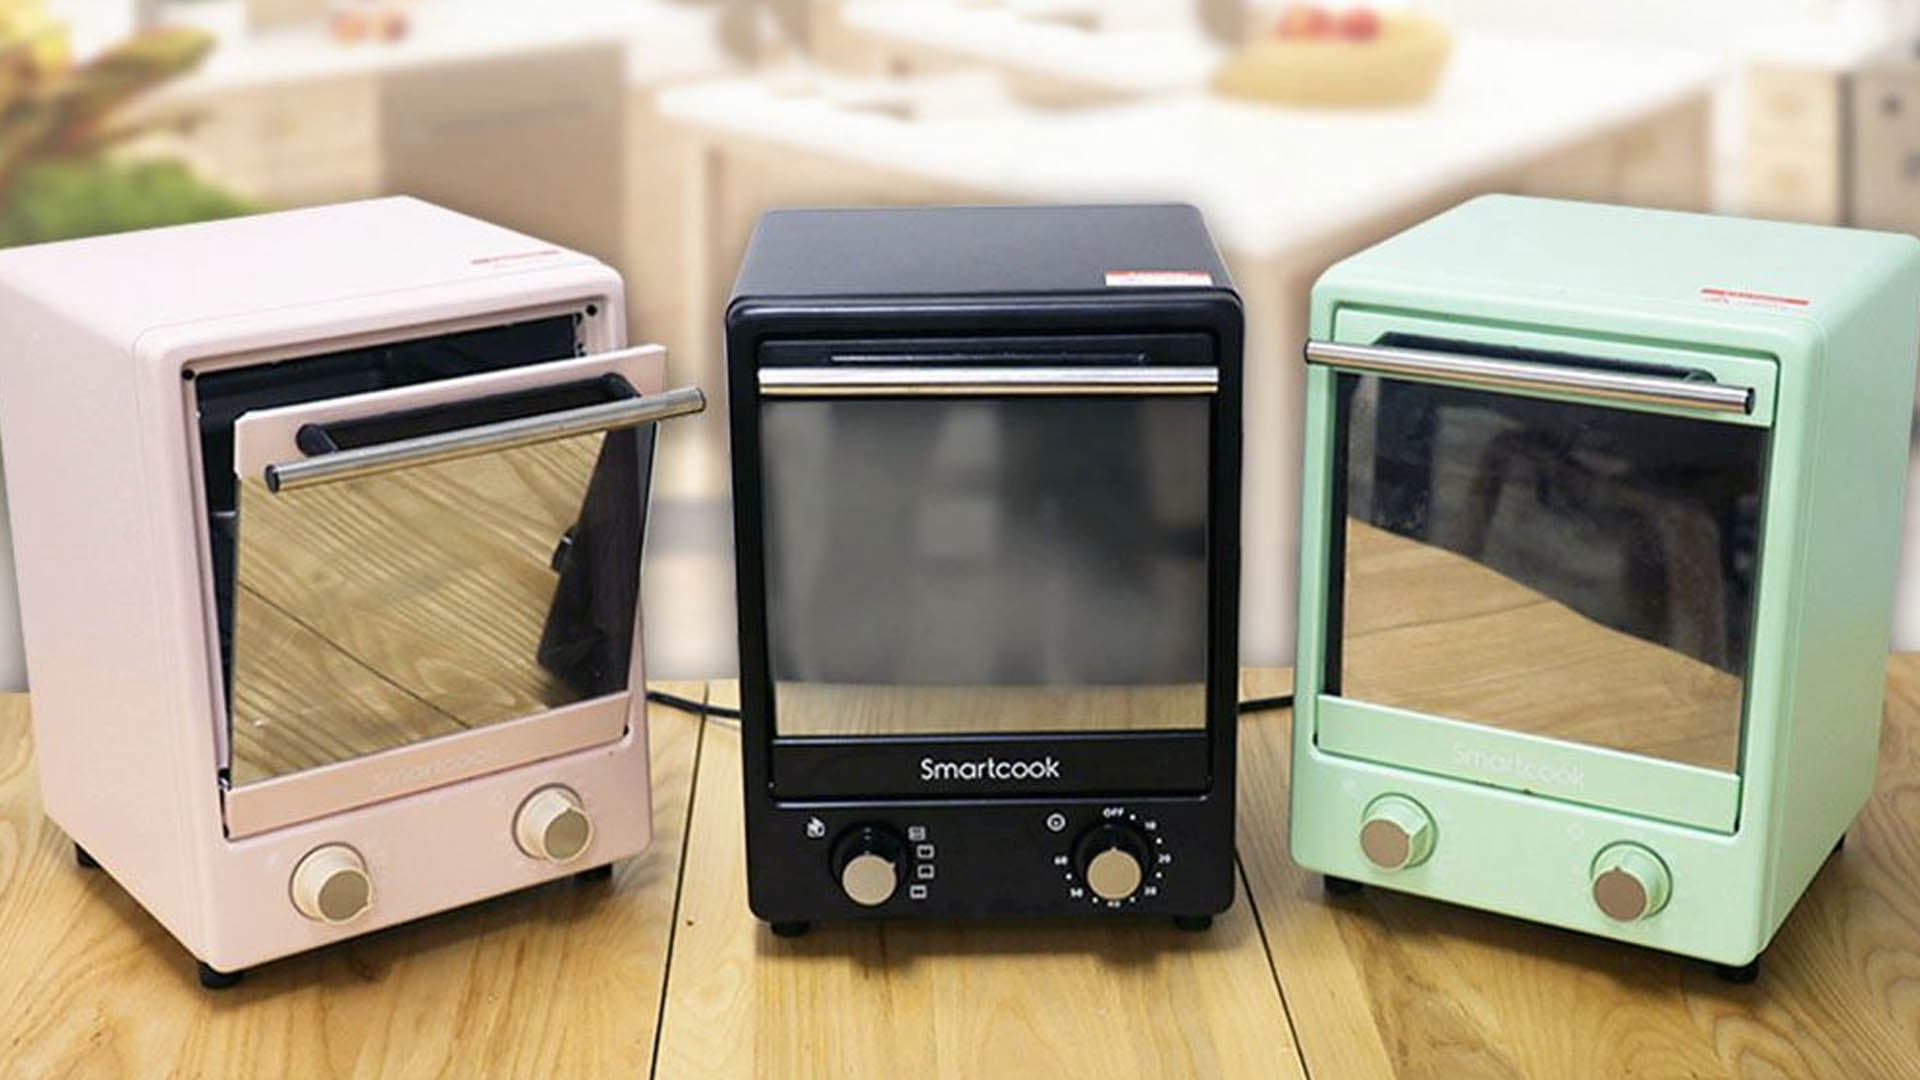 Bear's Pastel Pink Oven Can Bake and Air Fry